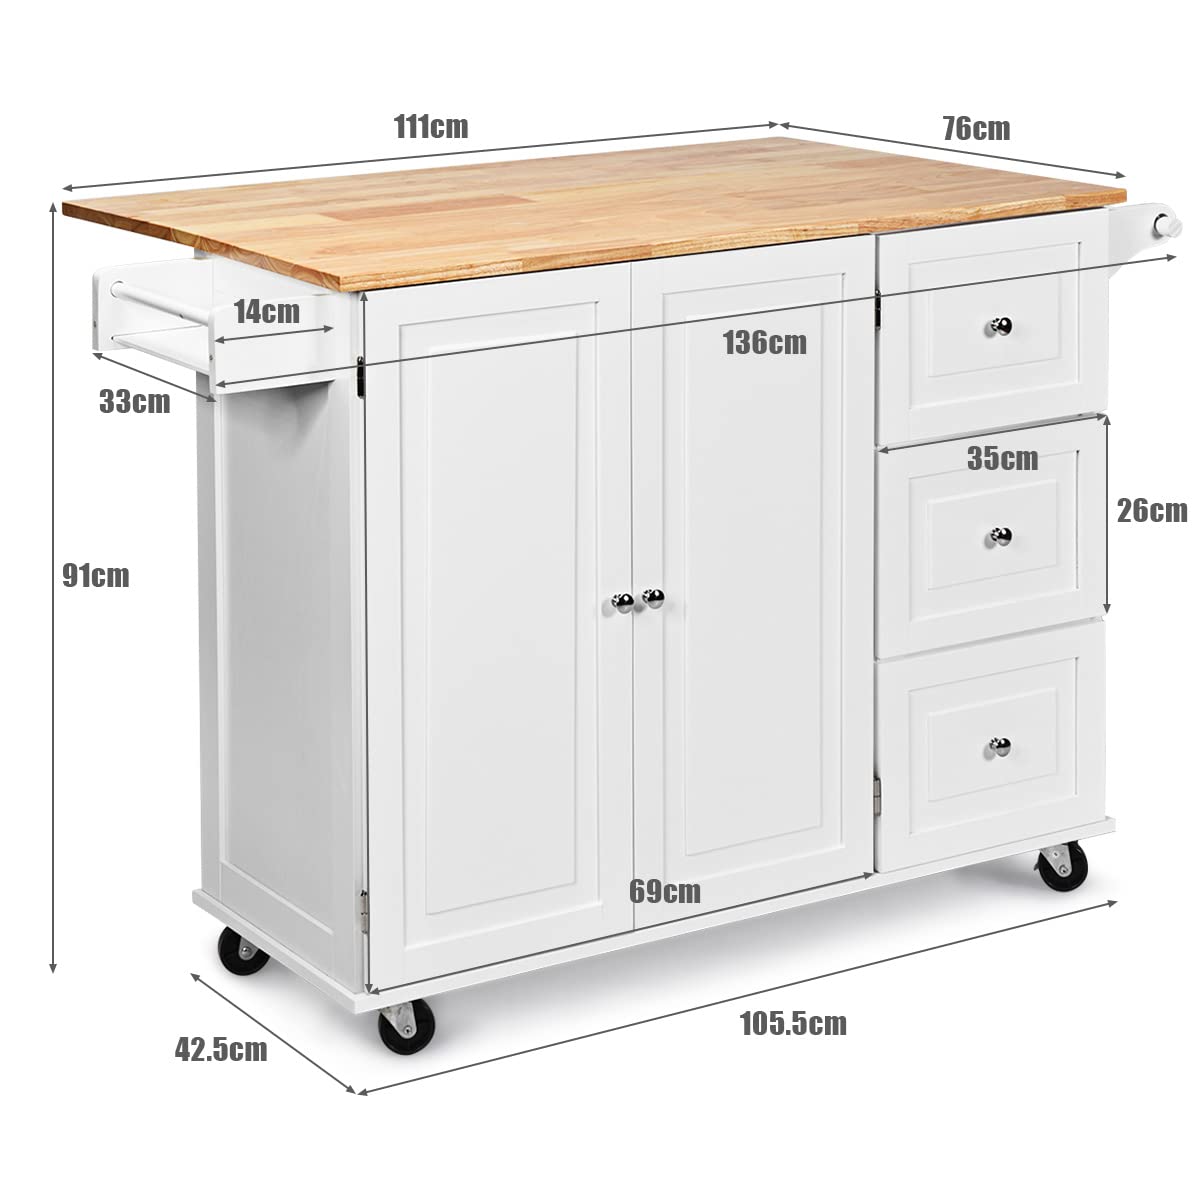 Giantex Kitchen Island Cart, Large Trolley Cart w/ Drop-Leaf Tabletop, Large Cabinet, 3 Drawers, Spice Rack, Towel Rack, Rolling Serving Trolley Cabinet